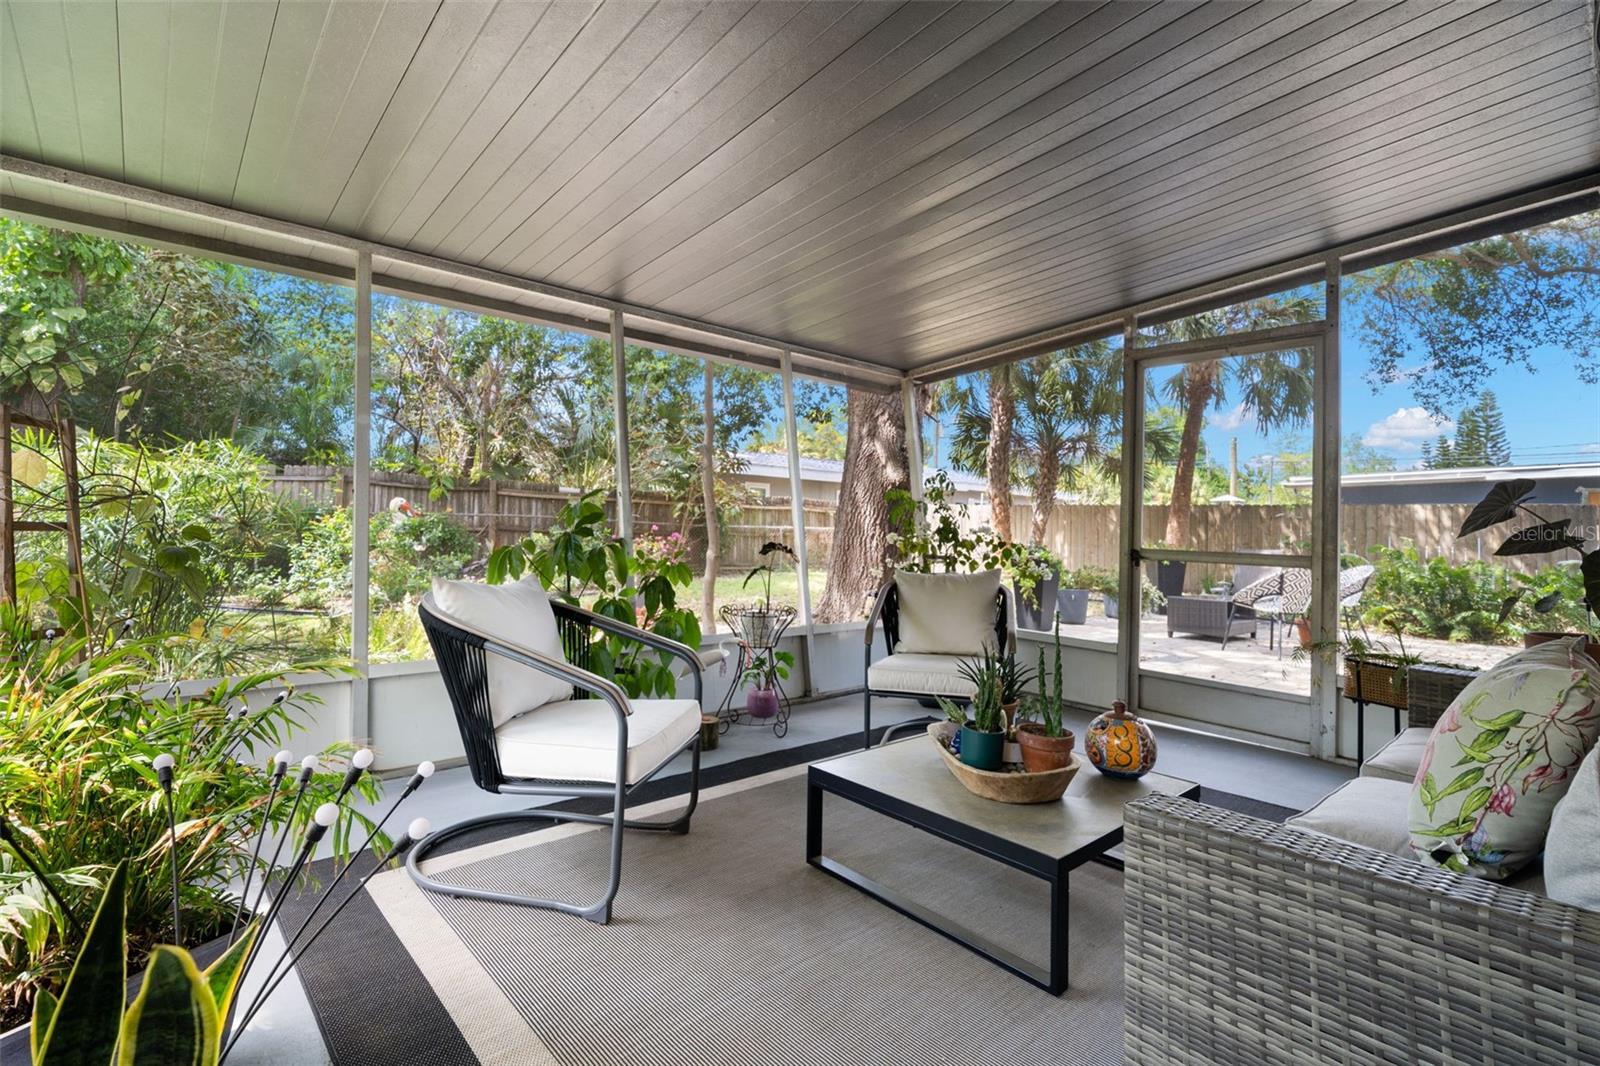 A beautiful screened lanai overlooking a peacefully landscaped oasis.